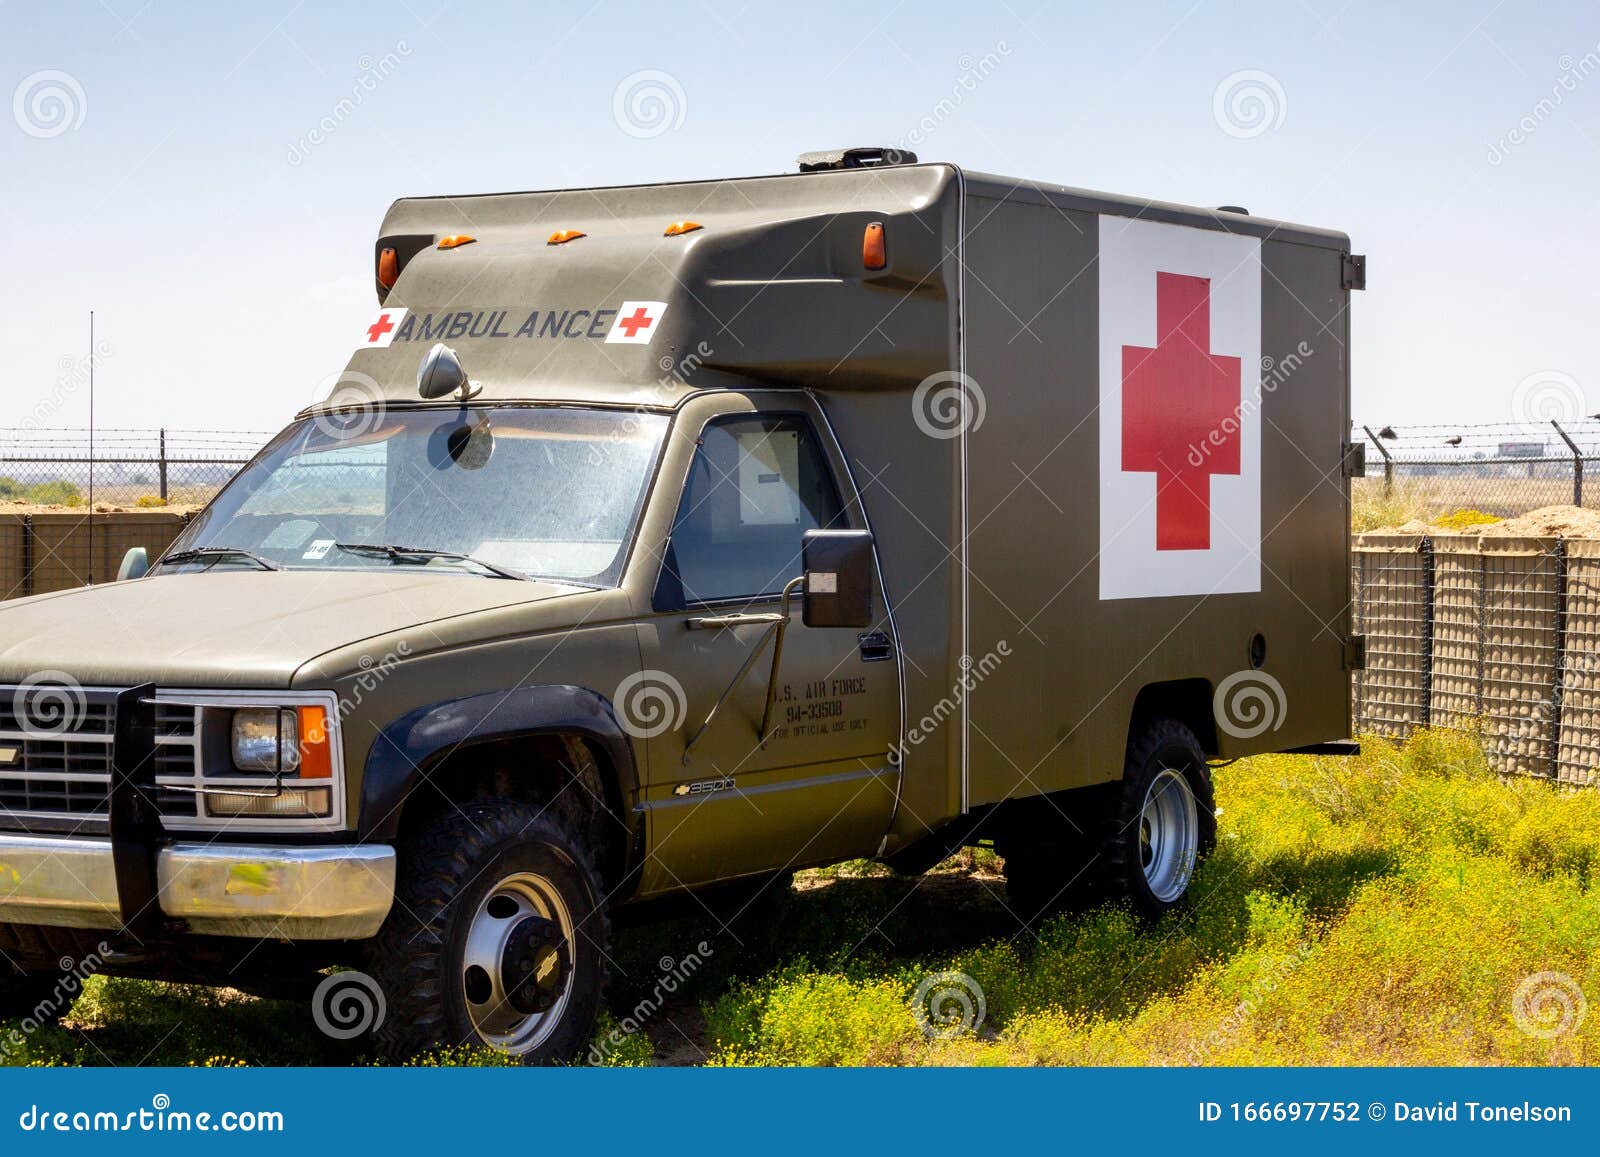 Military Ambulance Editorial Photography. Image Of Ruin - 166697752